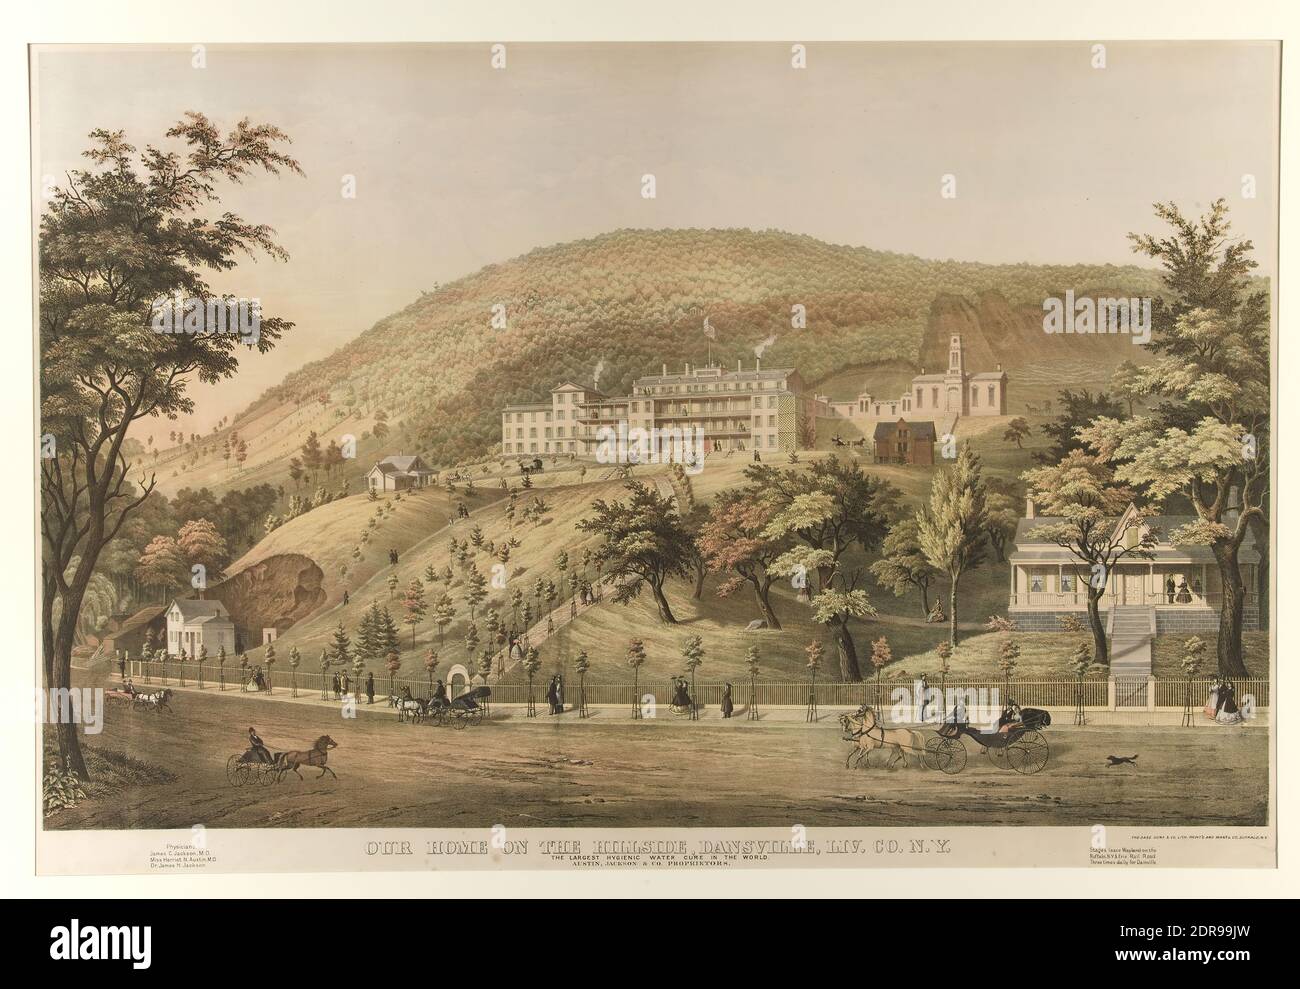 Lithographer: Unknown, Our Home on the Hillside, Dansville, Liv. Co. NY, The Largest Hygienic Water Cure in the World à, Color lithograph, sheet: 62 × 90.5 cm (24 7/16 × 35 5/8 in.), Made in United States, American, 19th century, Works on Paper - Prints Stock Photo